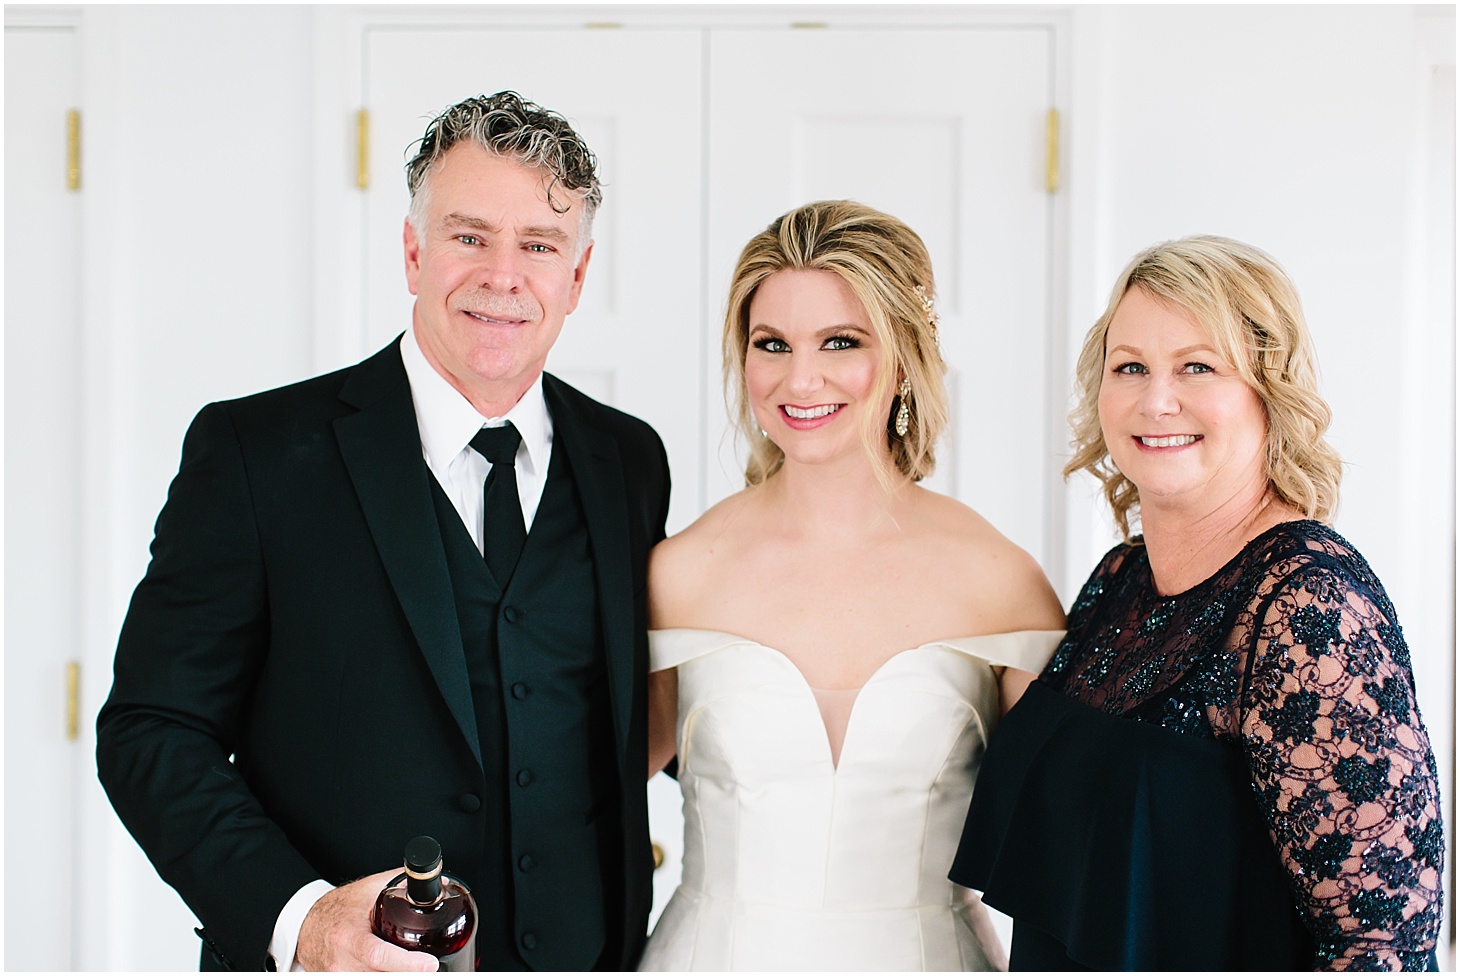 Bride and Parents at The LINE Hotel DC, Anne Barge Wedding Gown, Modern Spring Wedding at The LINE Hotel DC, Wedding Ceremony at National United Methodist Church, Sarah Bradshaw Photography, DC Wedding Photographer